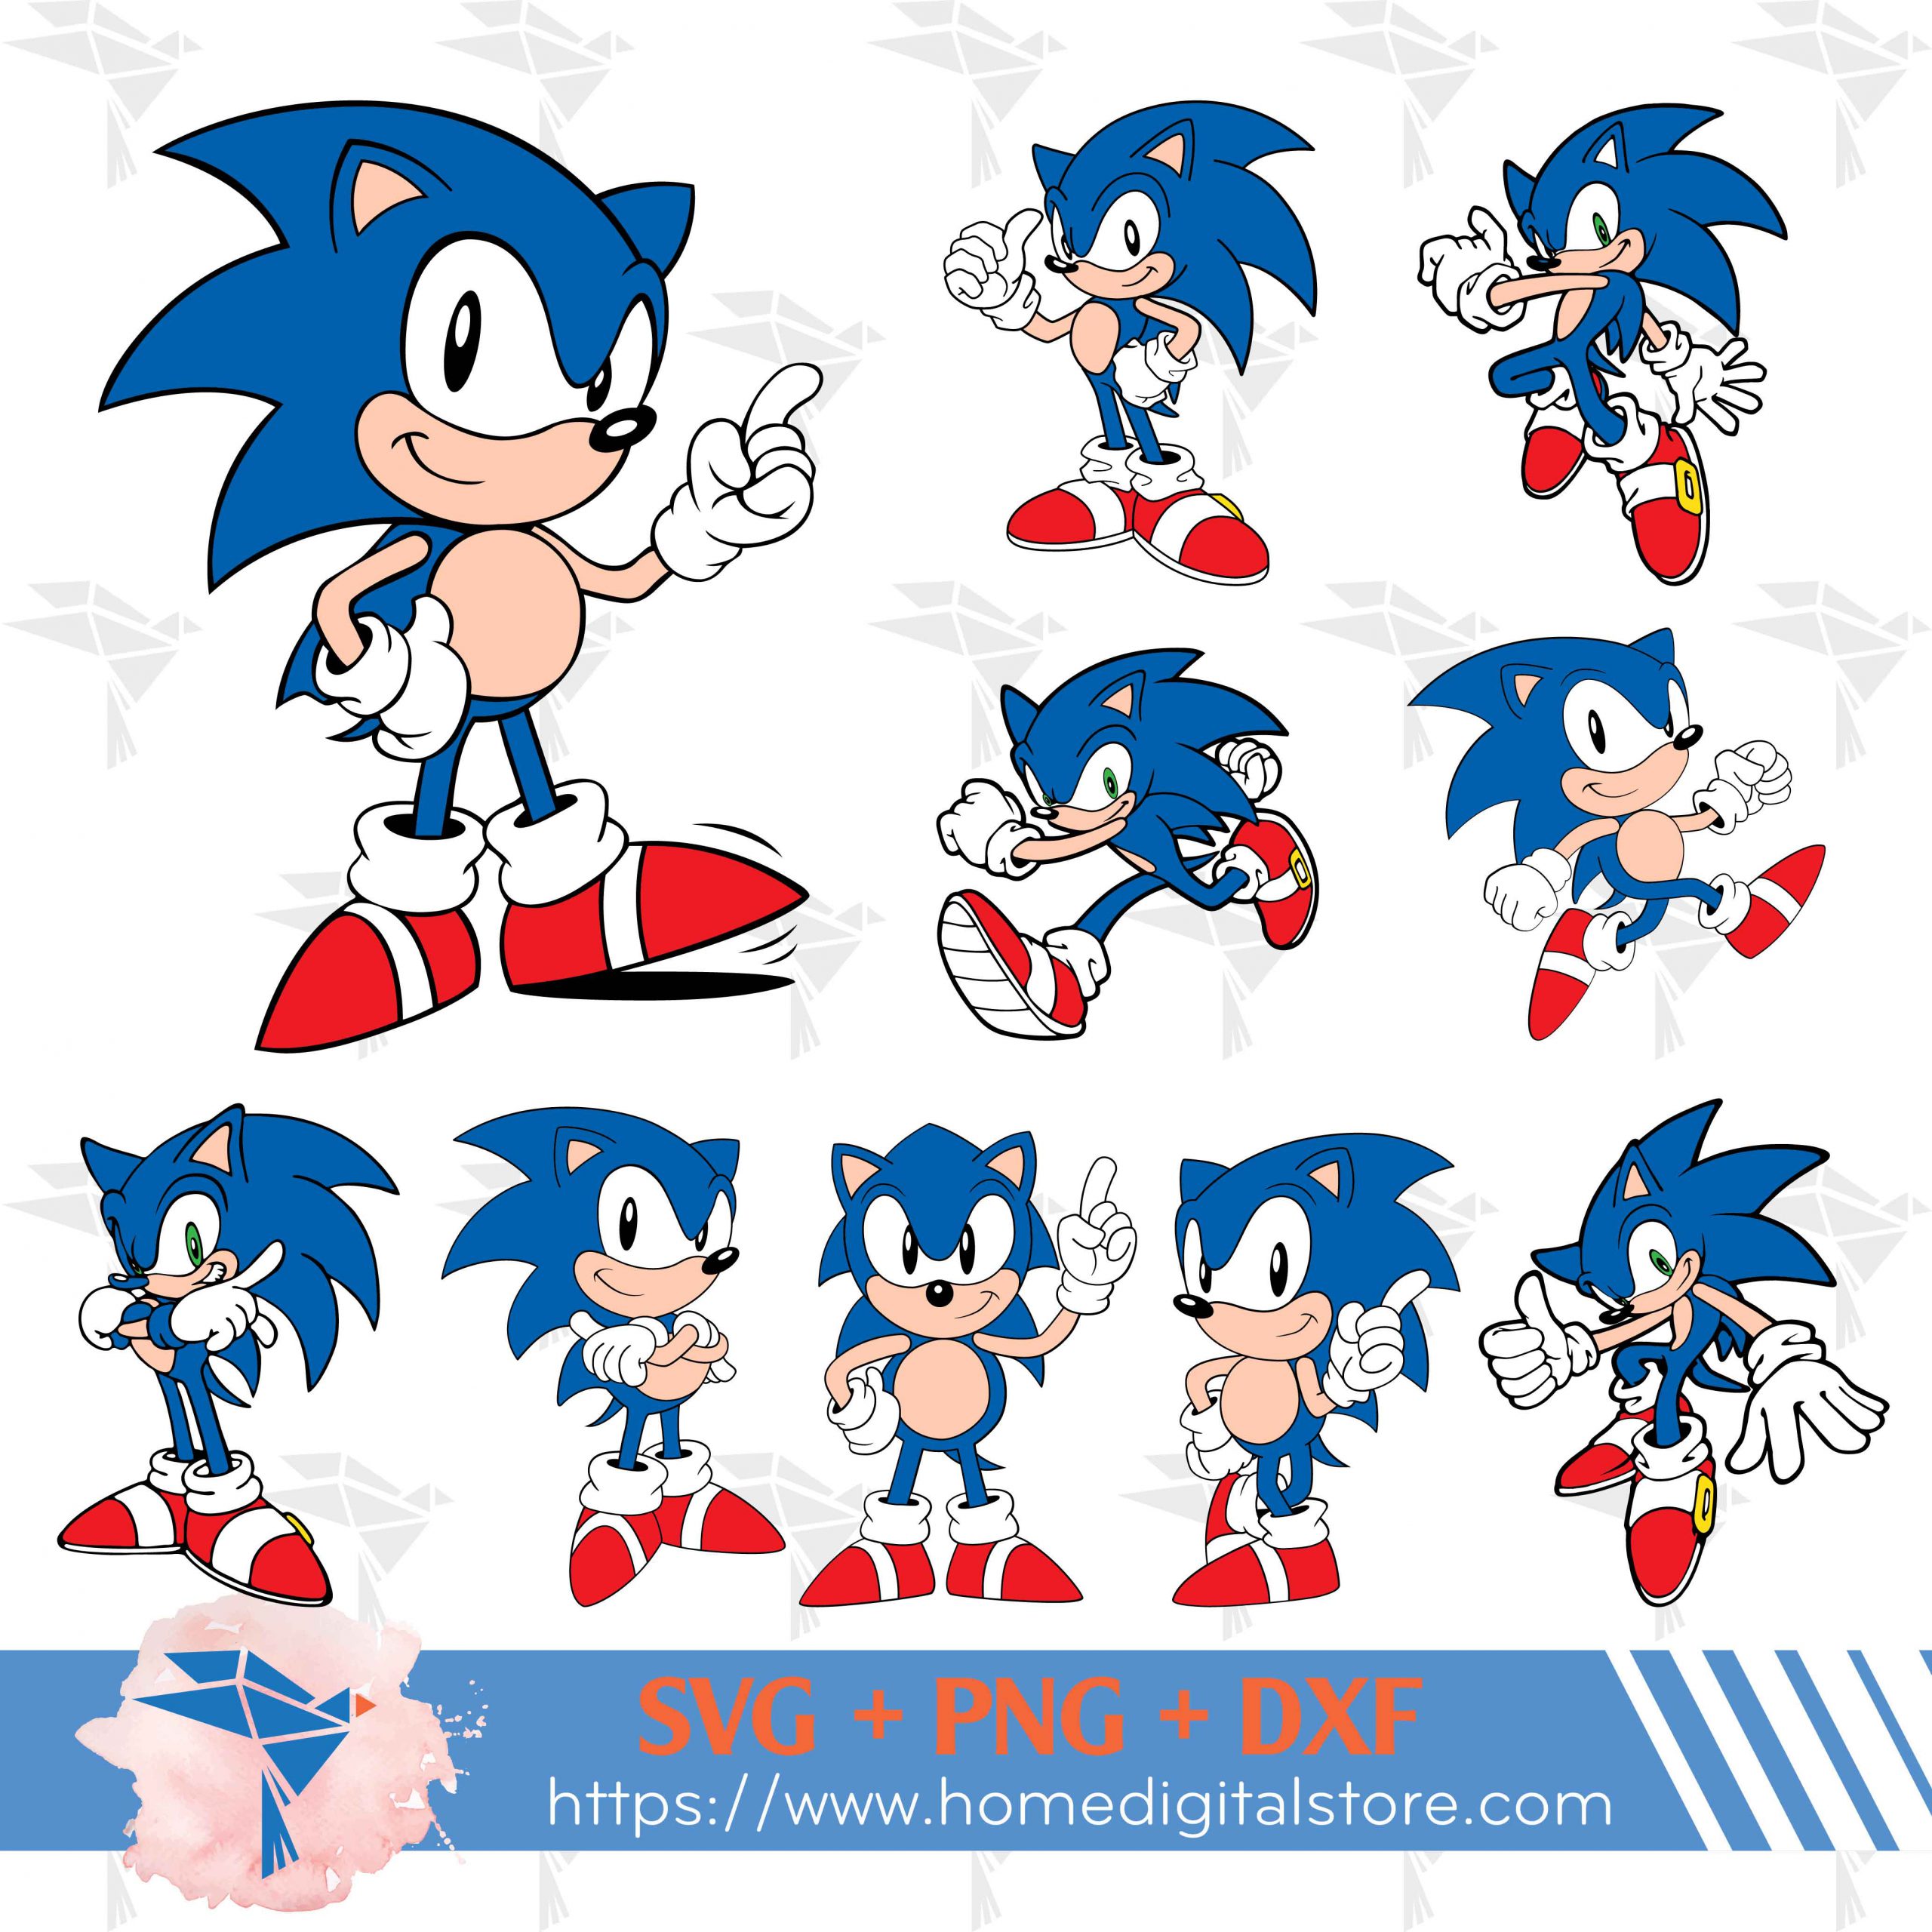 Sonic Face SVG, PNG, DXF Instant download files for Cricut Design Space,  Silhouette, Cutting, Printing, or more